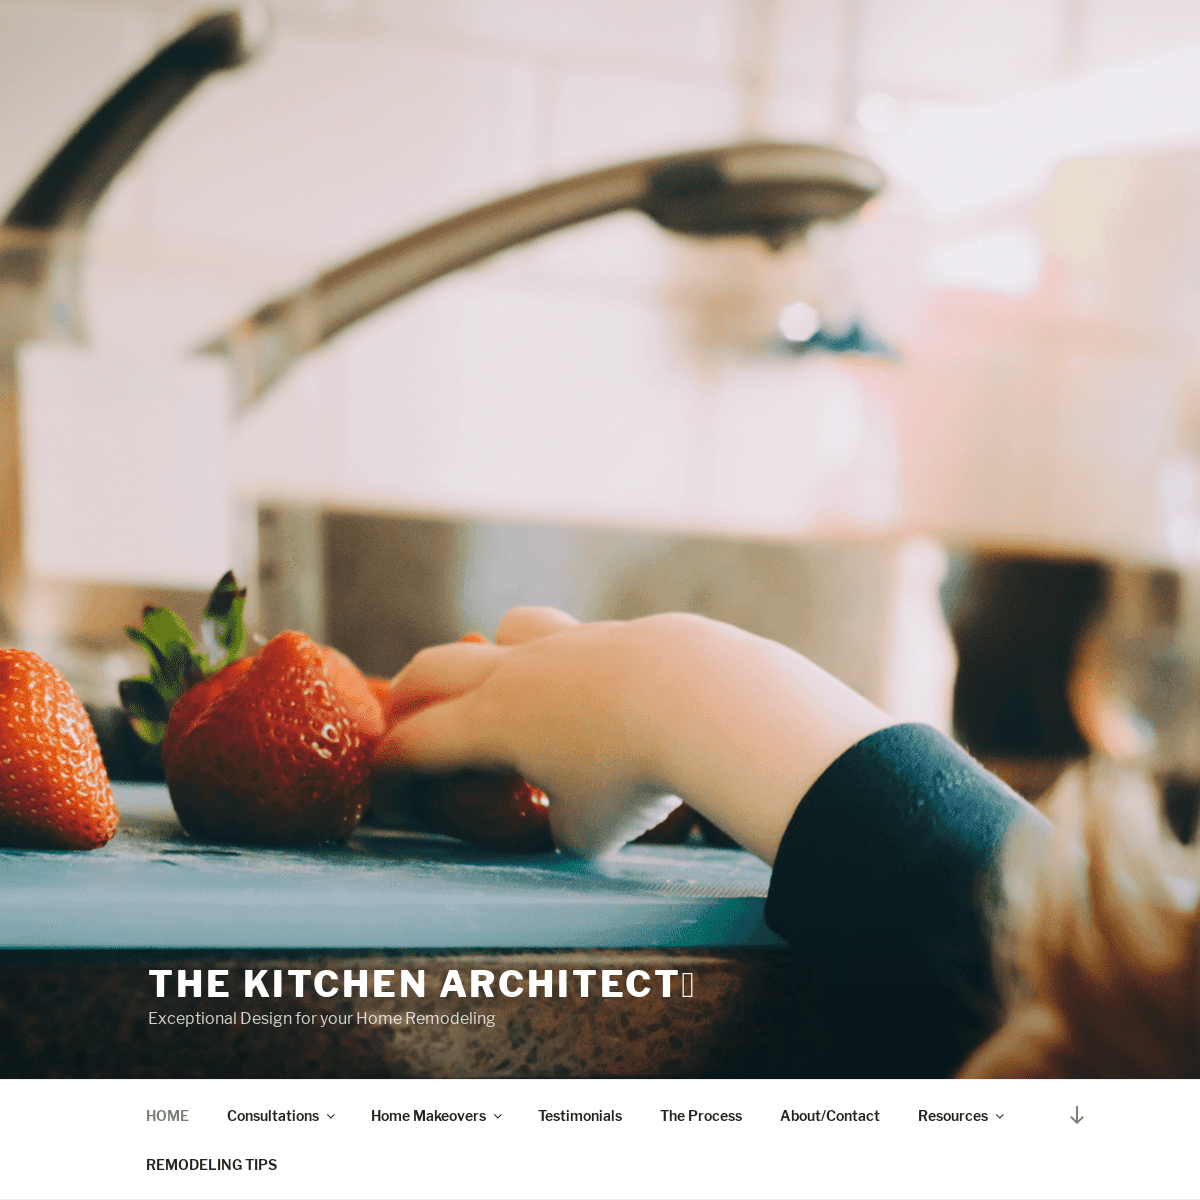 The Kitchen Architect℠ – Exceptional Design for your Home Remodeling